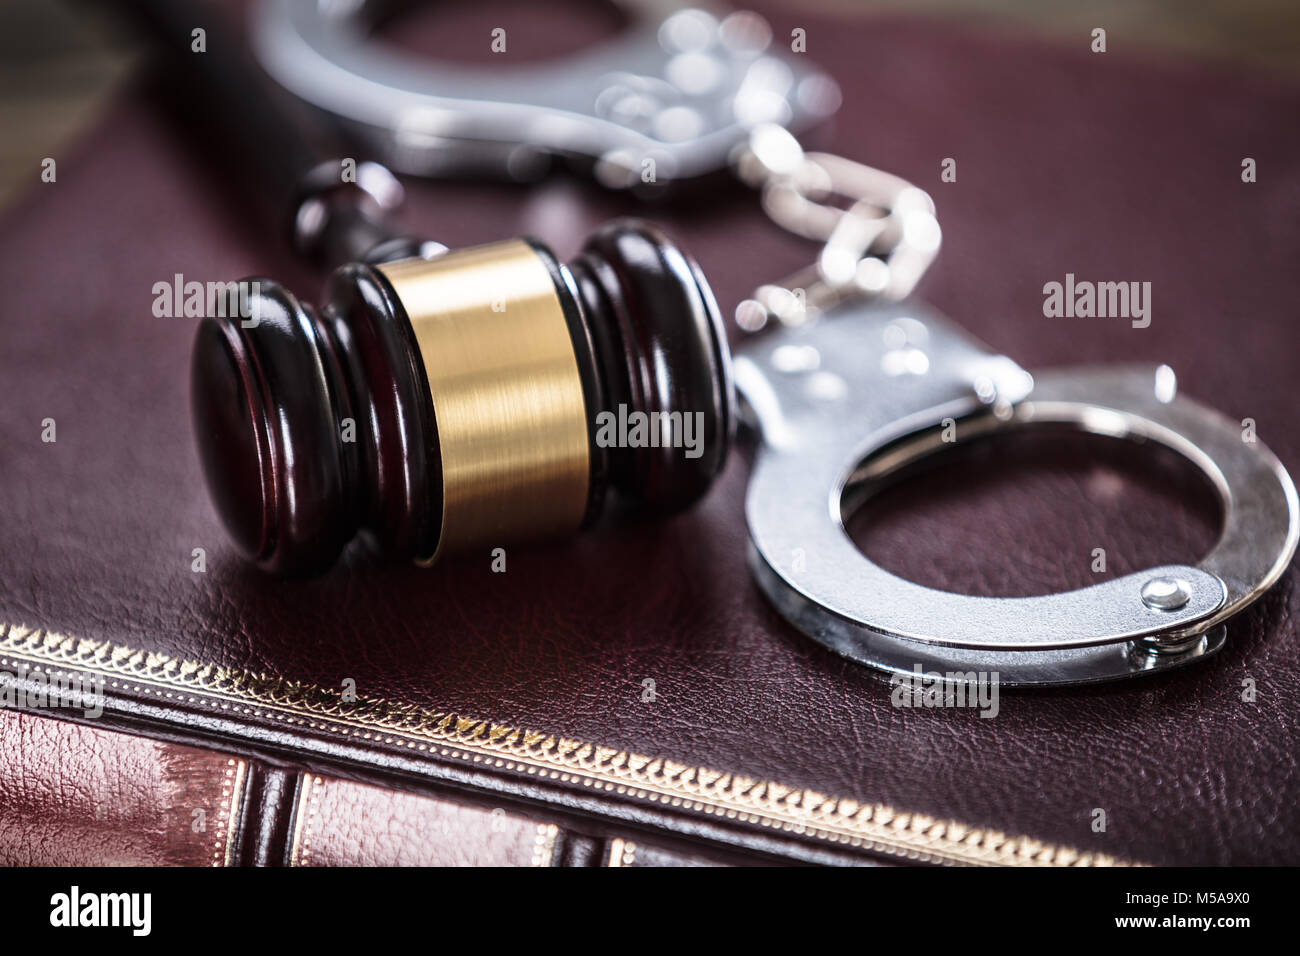 Close-up Of Handcuffs And Gavel On Law Book In Courtroom Stock Photo